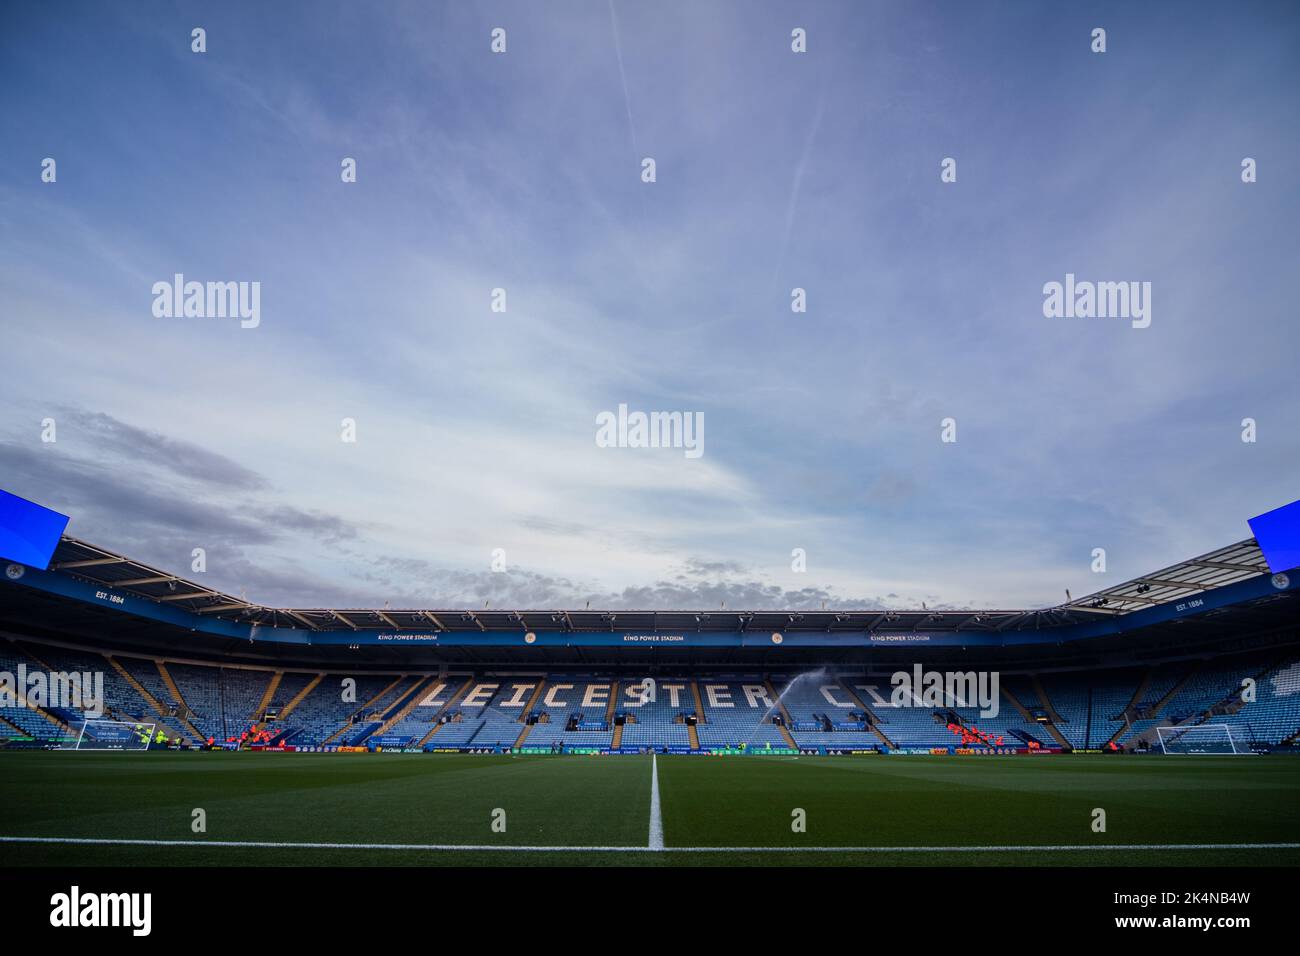 A general view of the King Power stadium before the Premier League match Leicester City vs Nottingham Forest at King Power Stadium, Leicester, United Kingdom, 3rd October 2022  (Photo by Ritchie Sumpter/News Images) Stock Photo